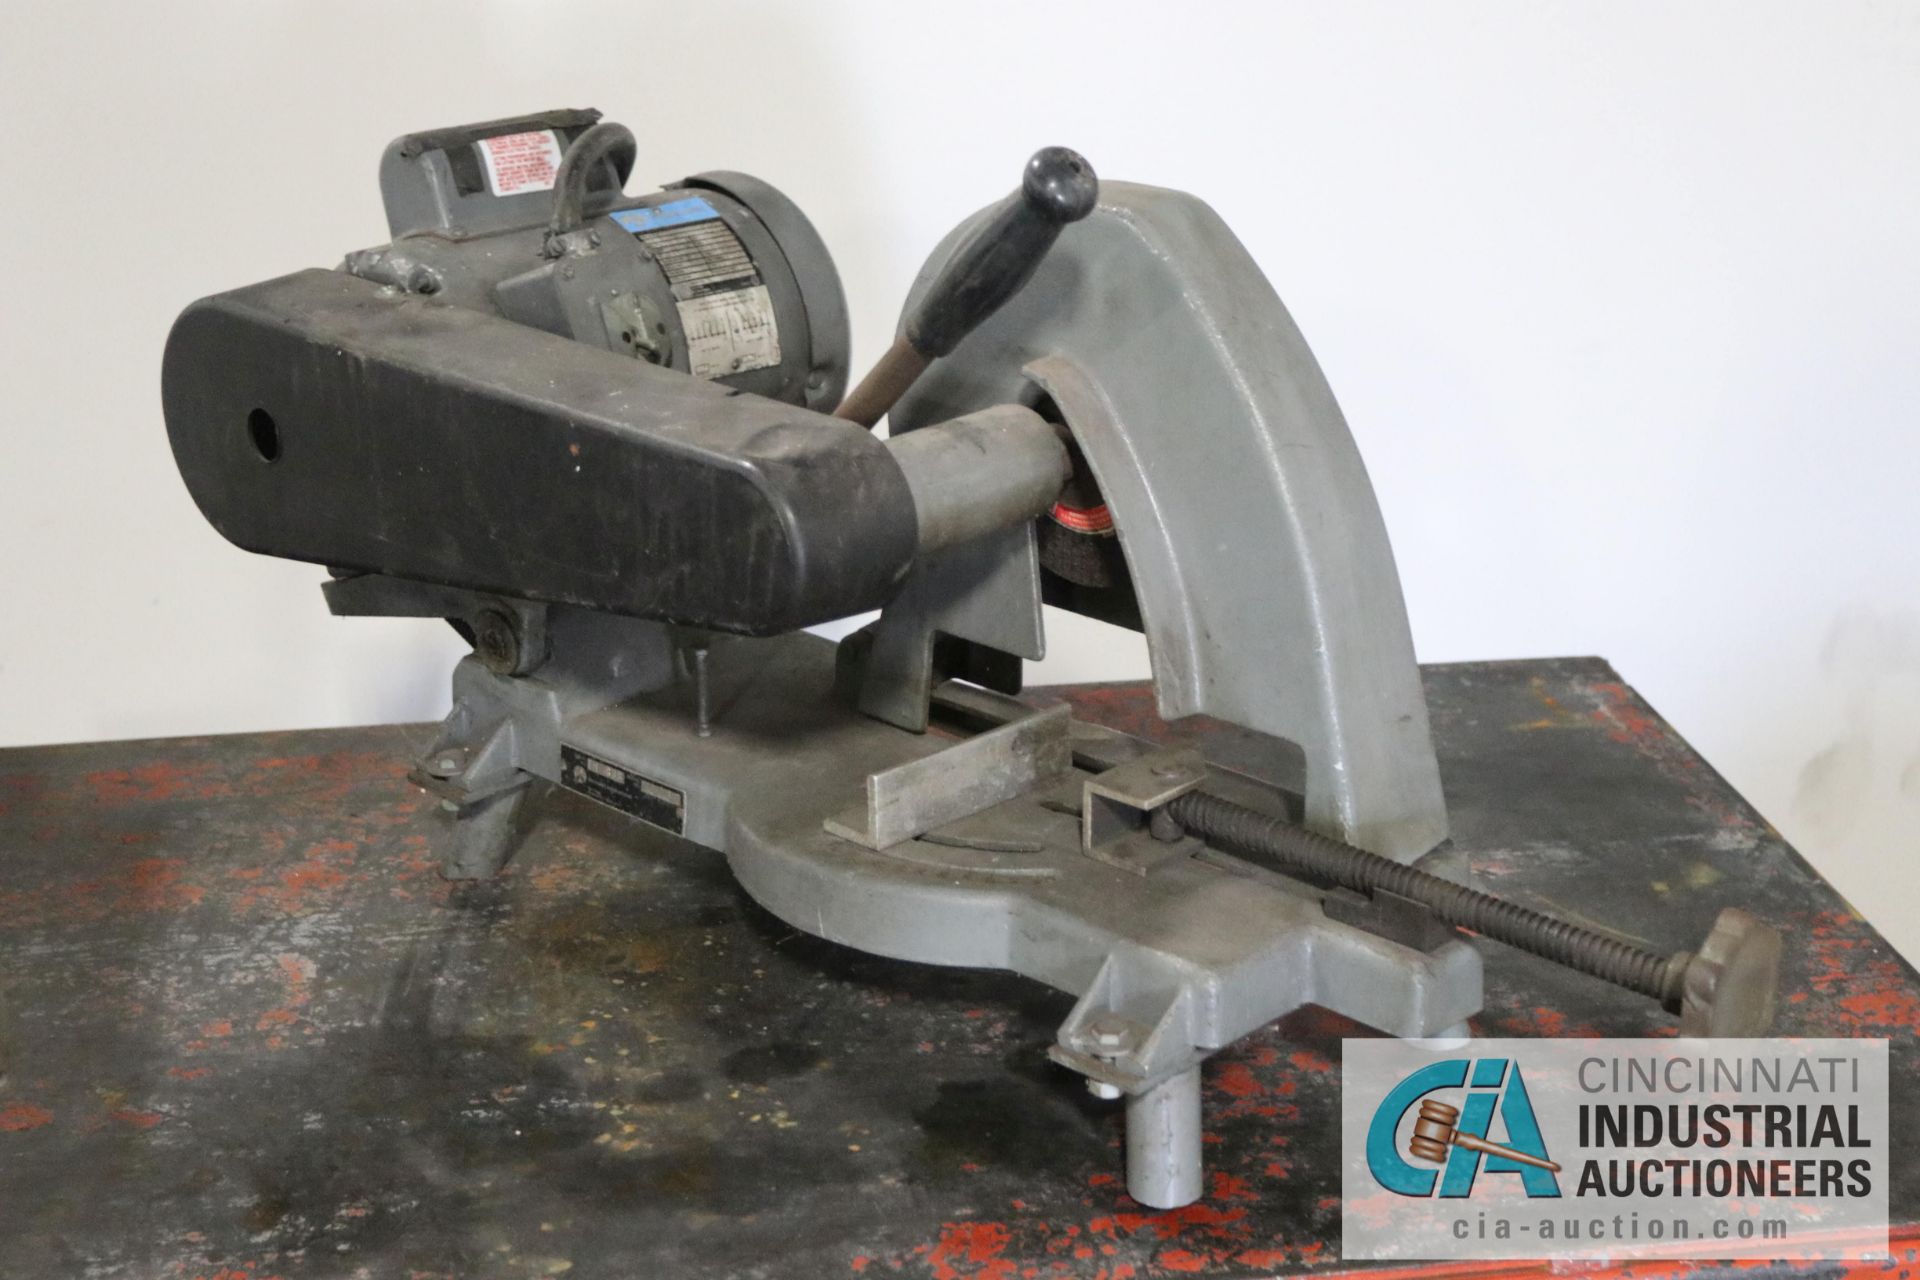 3 HP ROCKWELL MODEL 8 ABRASIVE CUTOFF SAW; S/N 438-02-3140808, SINGLE PHASE - Located in Holland, - Image 3 of 5